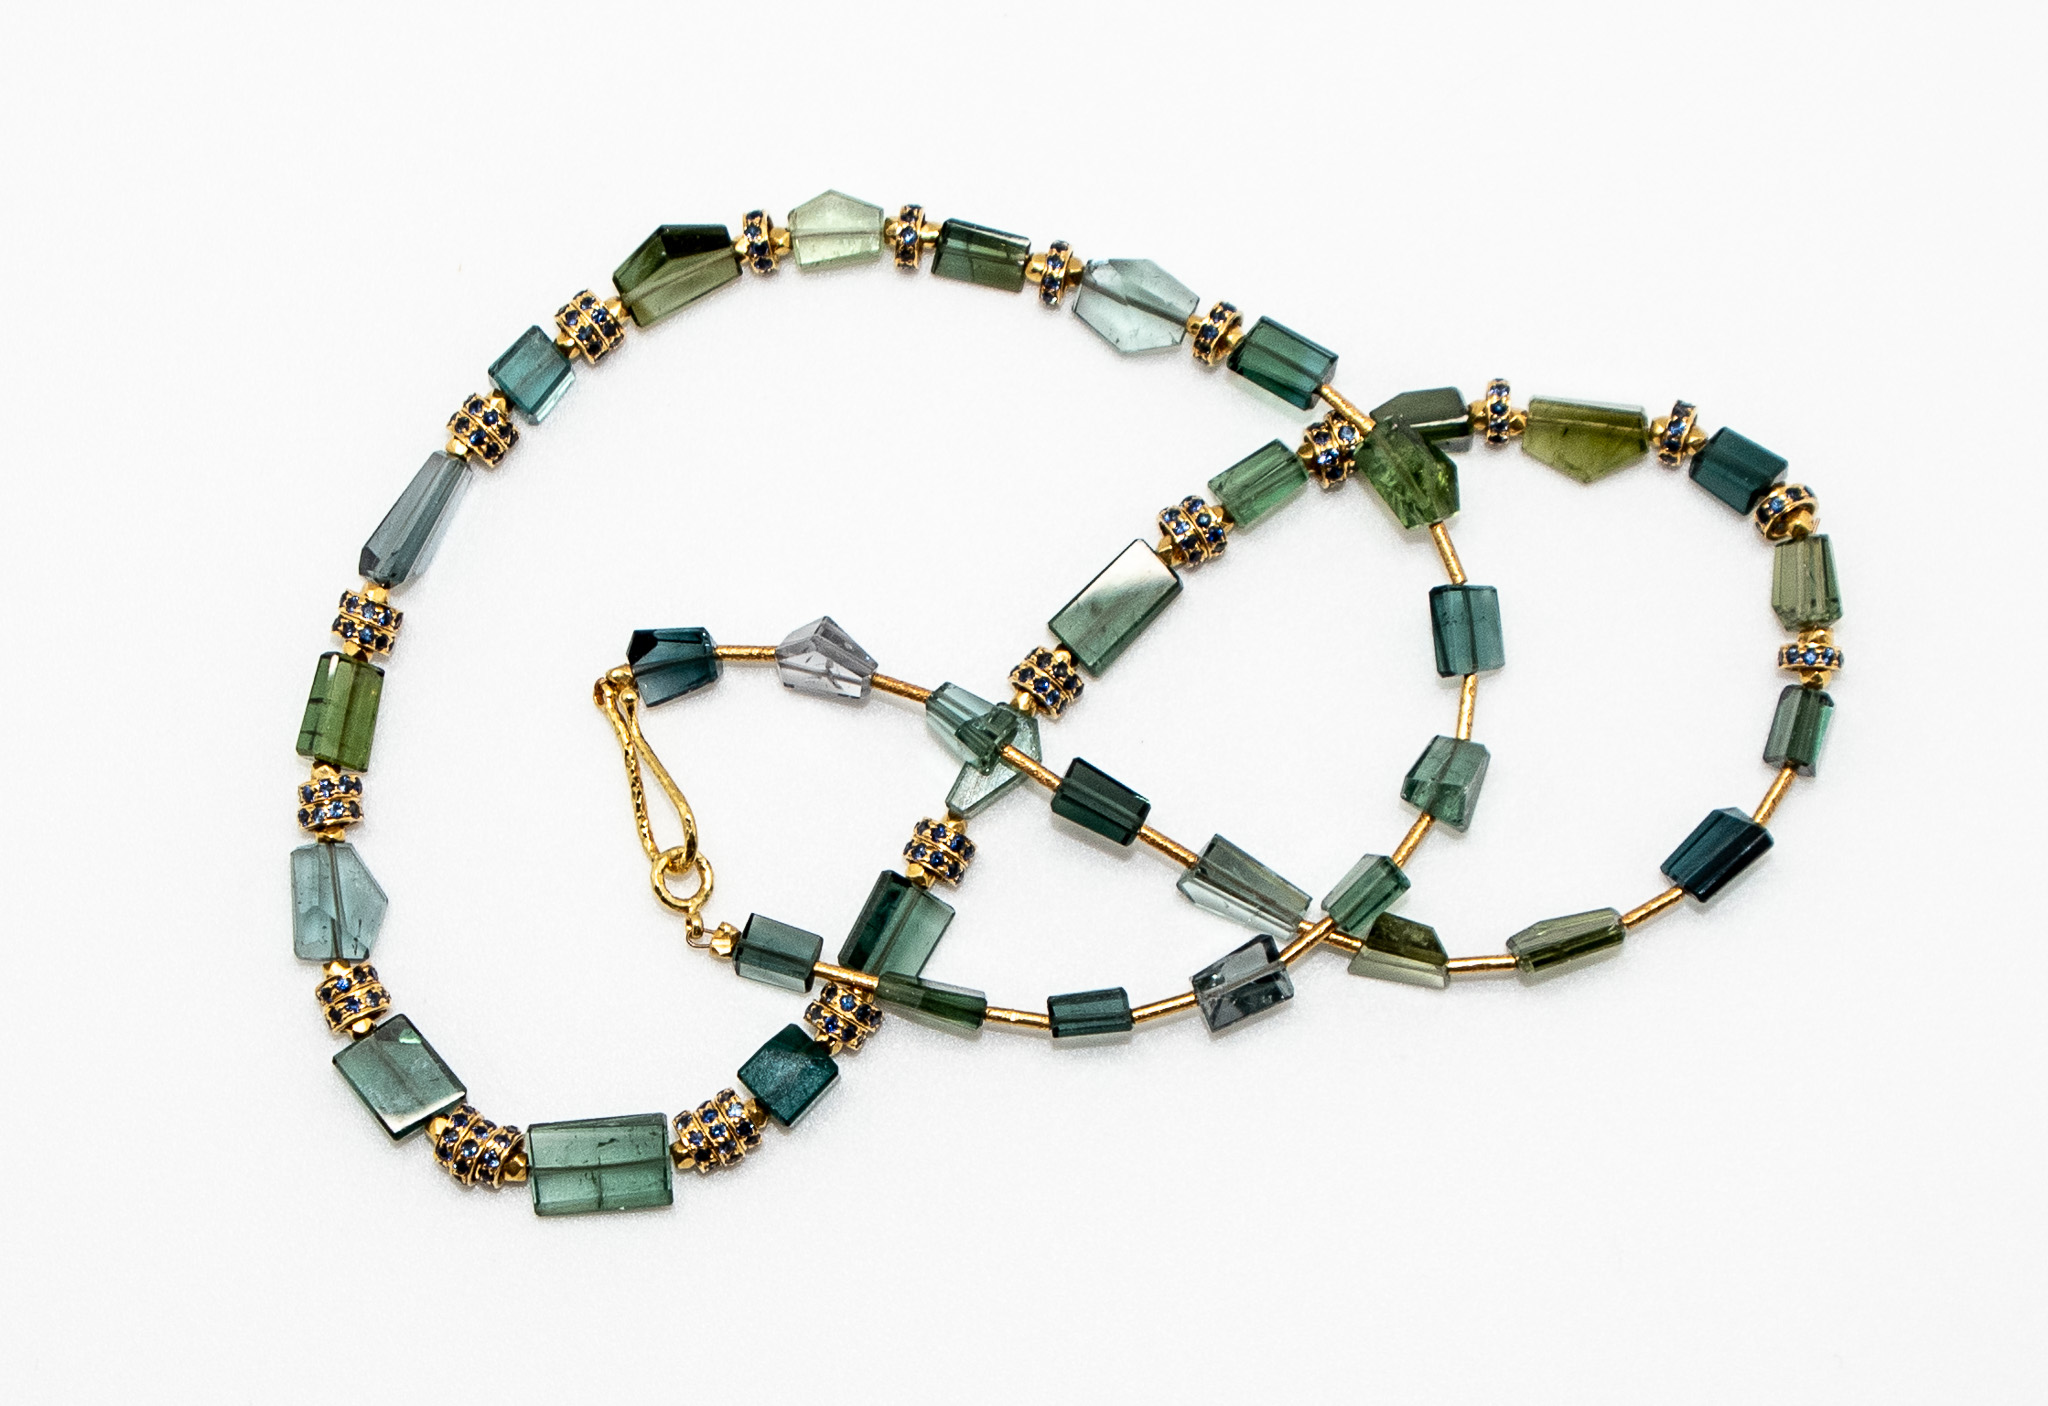 Green polished sliced crystals of tourmaline spaced with 18K gold and sapphire rondelle beads and 18K hook & ey clasp